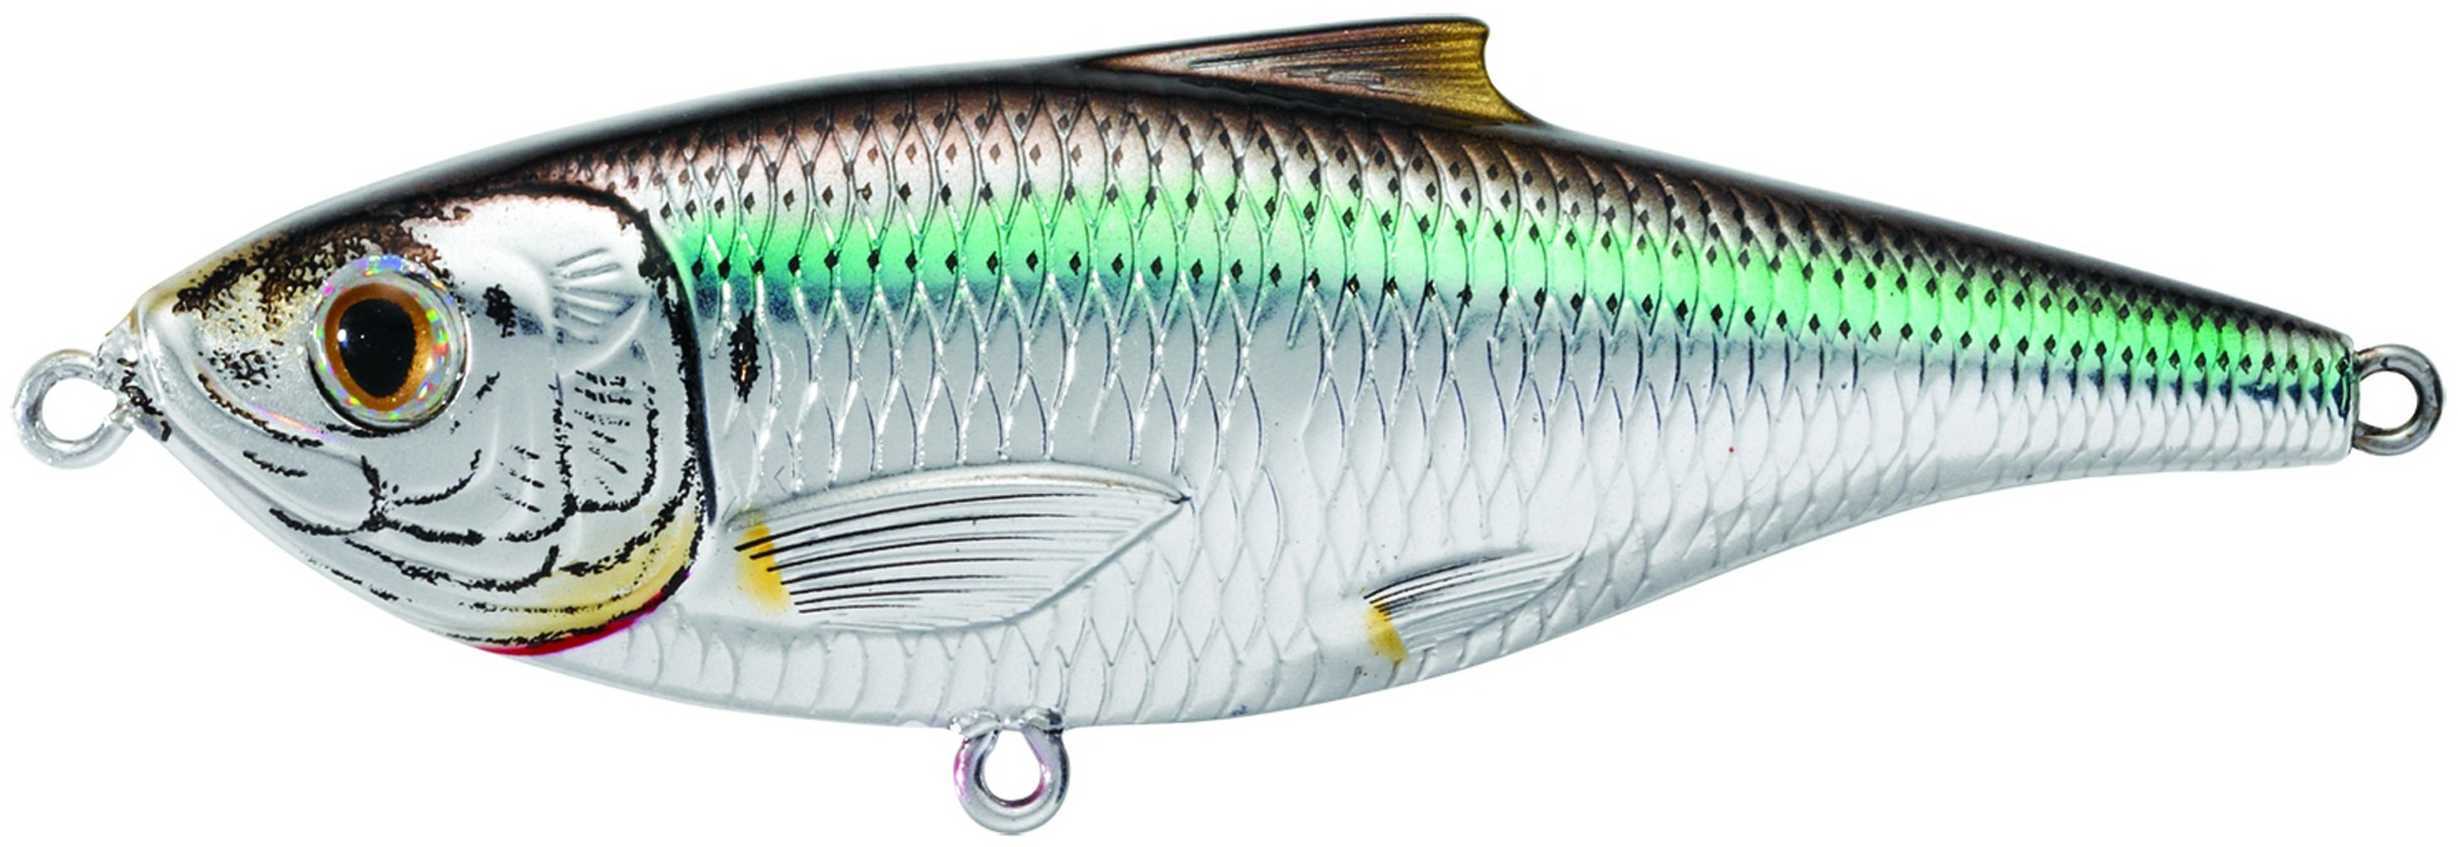 LIVETARGET Lures / Koppers Fishing and Tackle Corp Scaled Sardine Twitchbait Natural/Metallic #2 Md: SST90S902